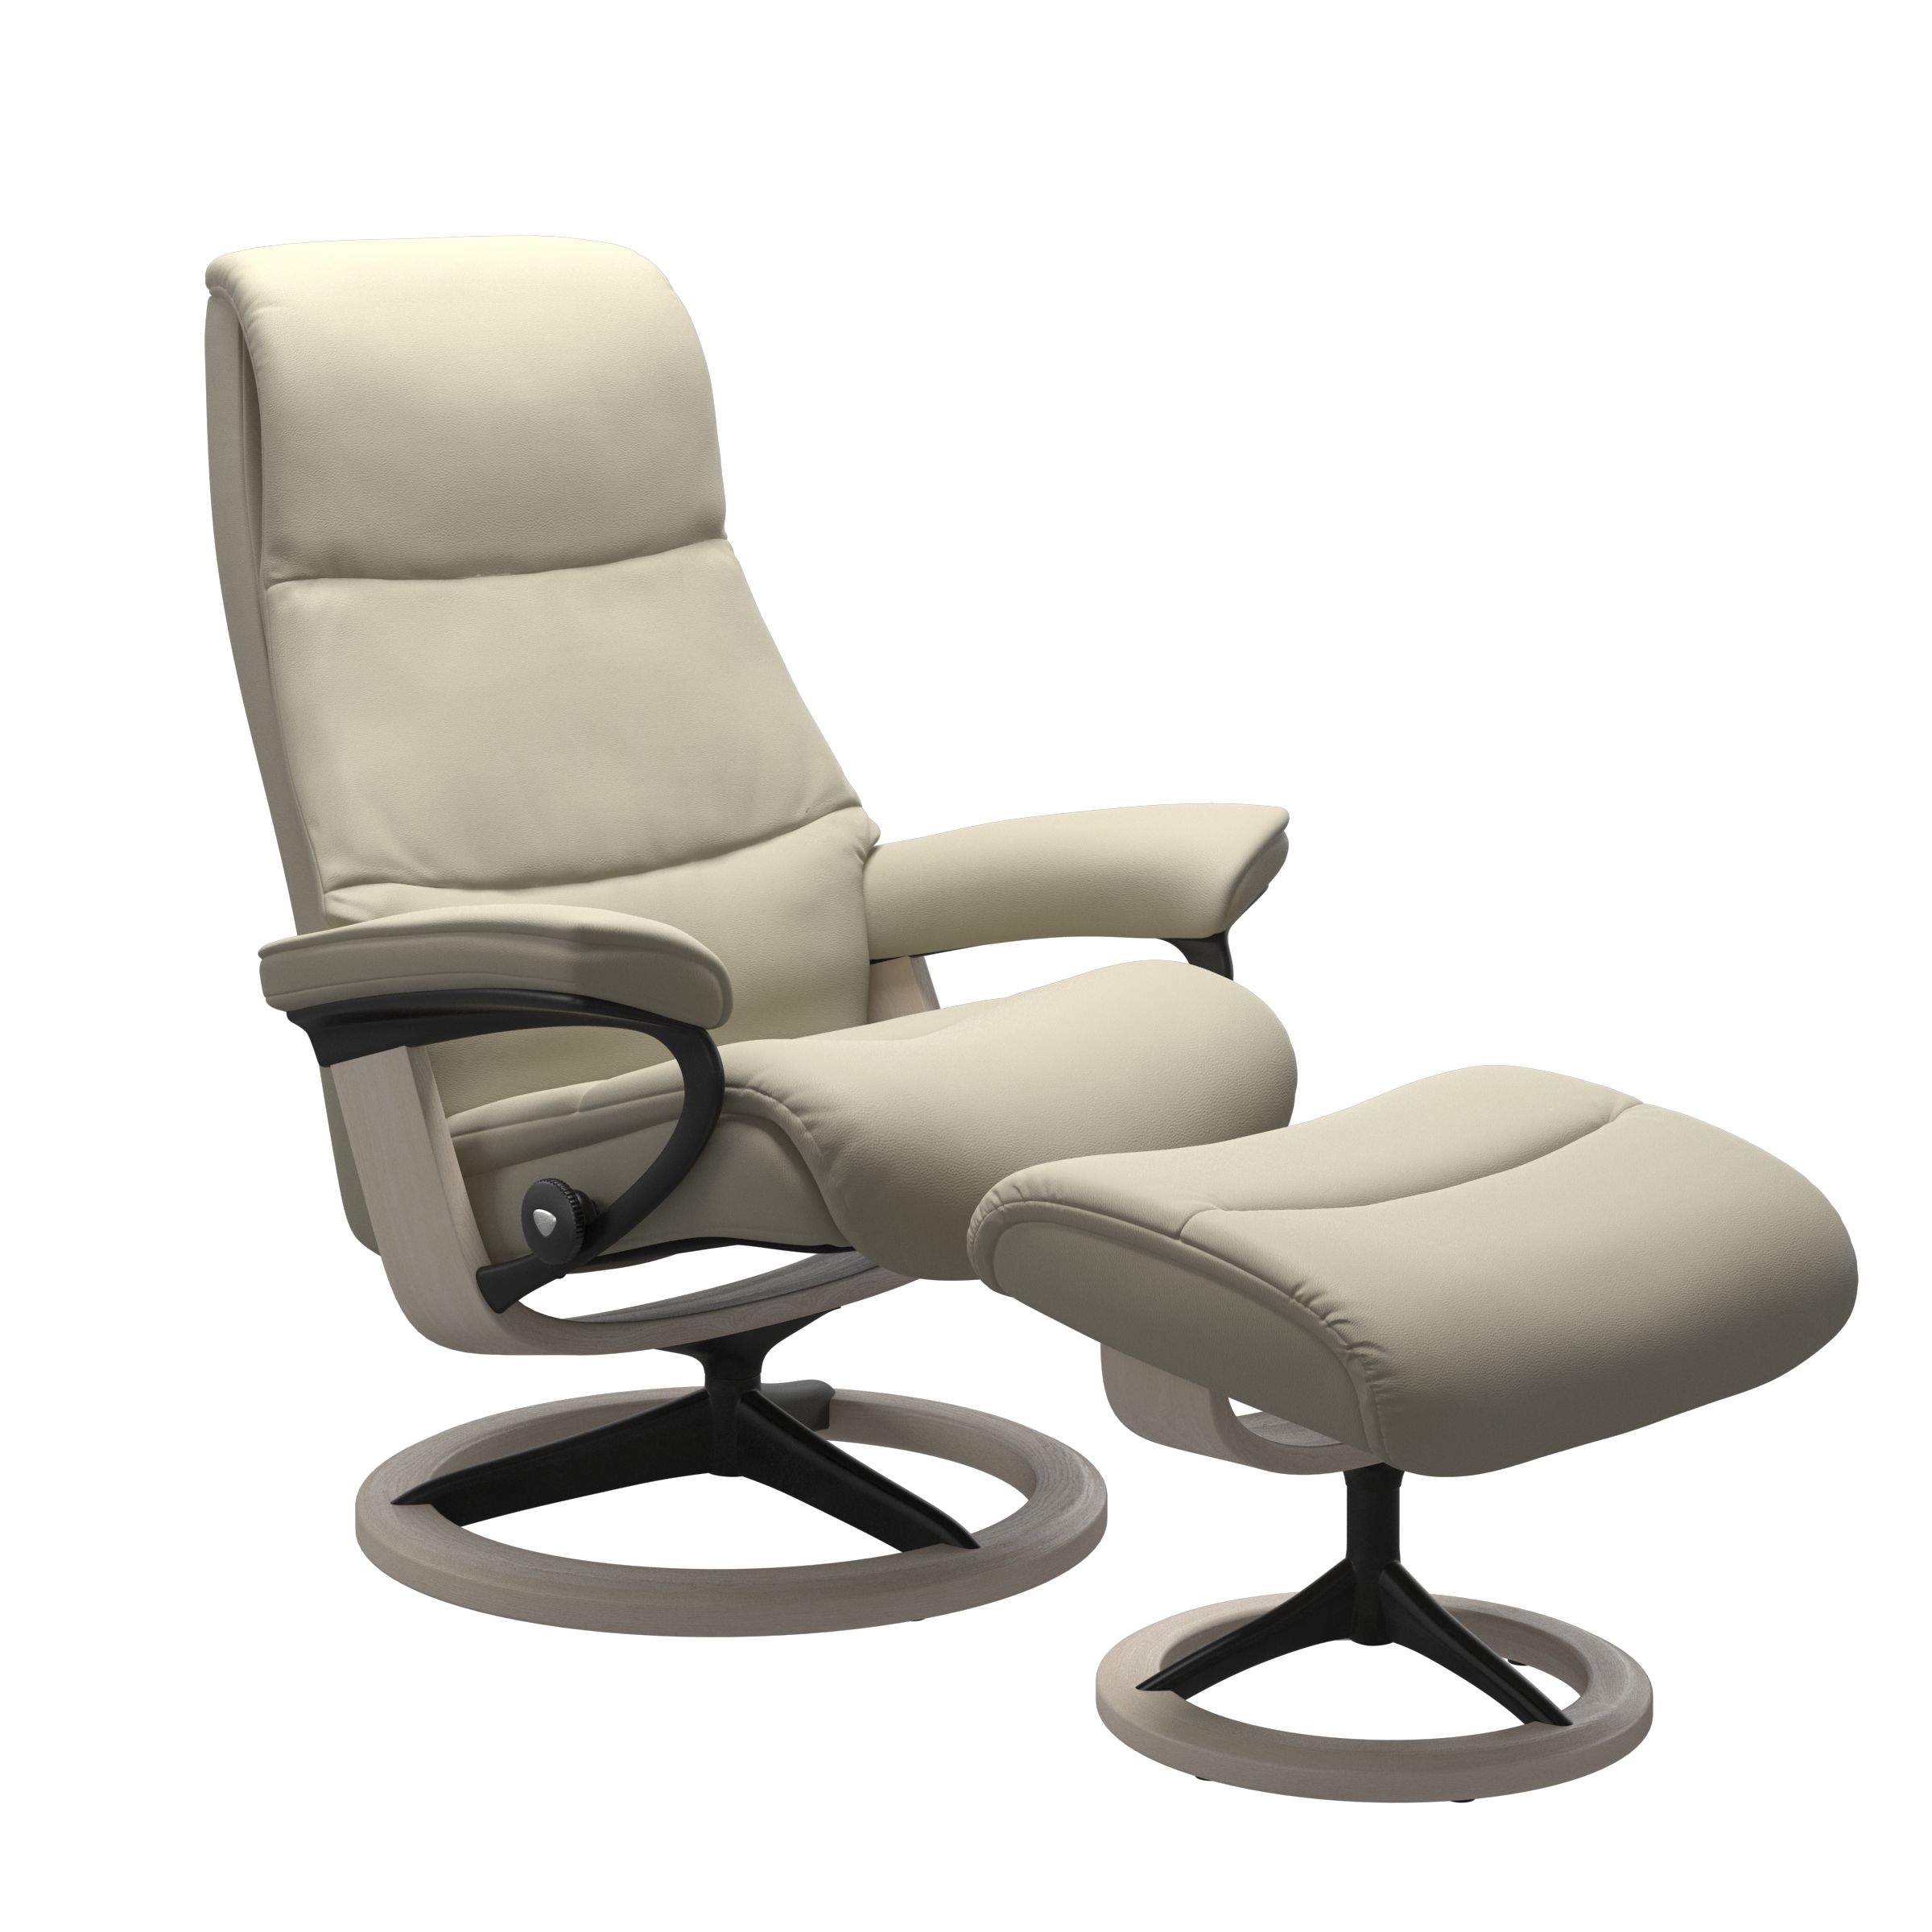 Stressless View Small Recliner and Ottoman with Signature Base